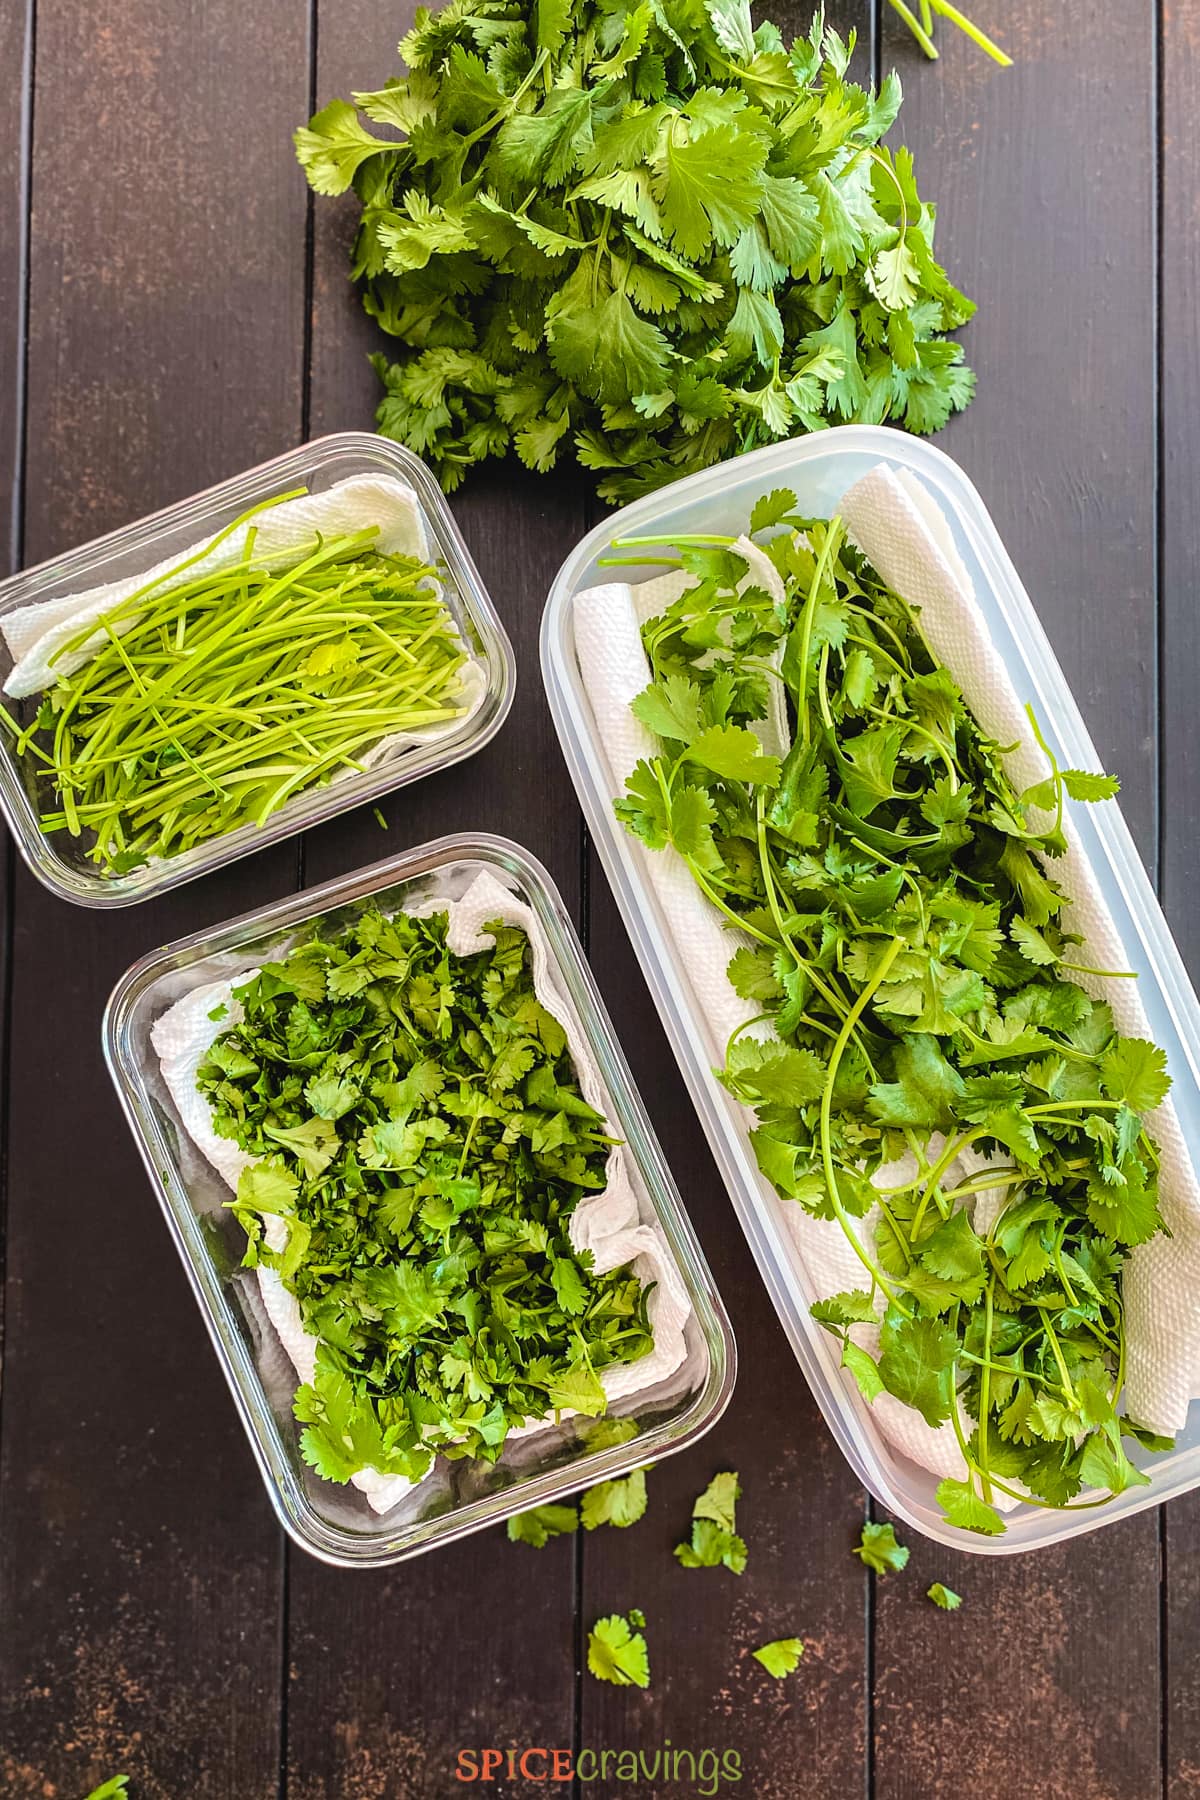 whole, chopped and stems of cilantro in containers